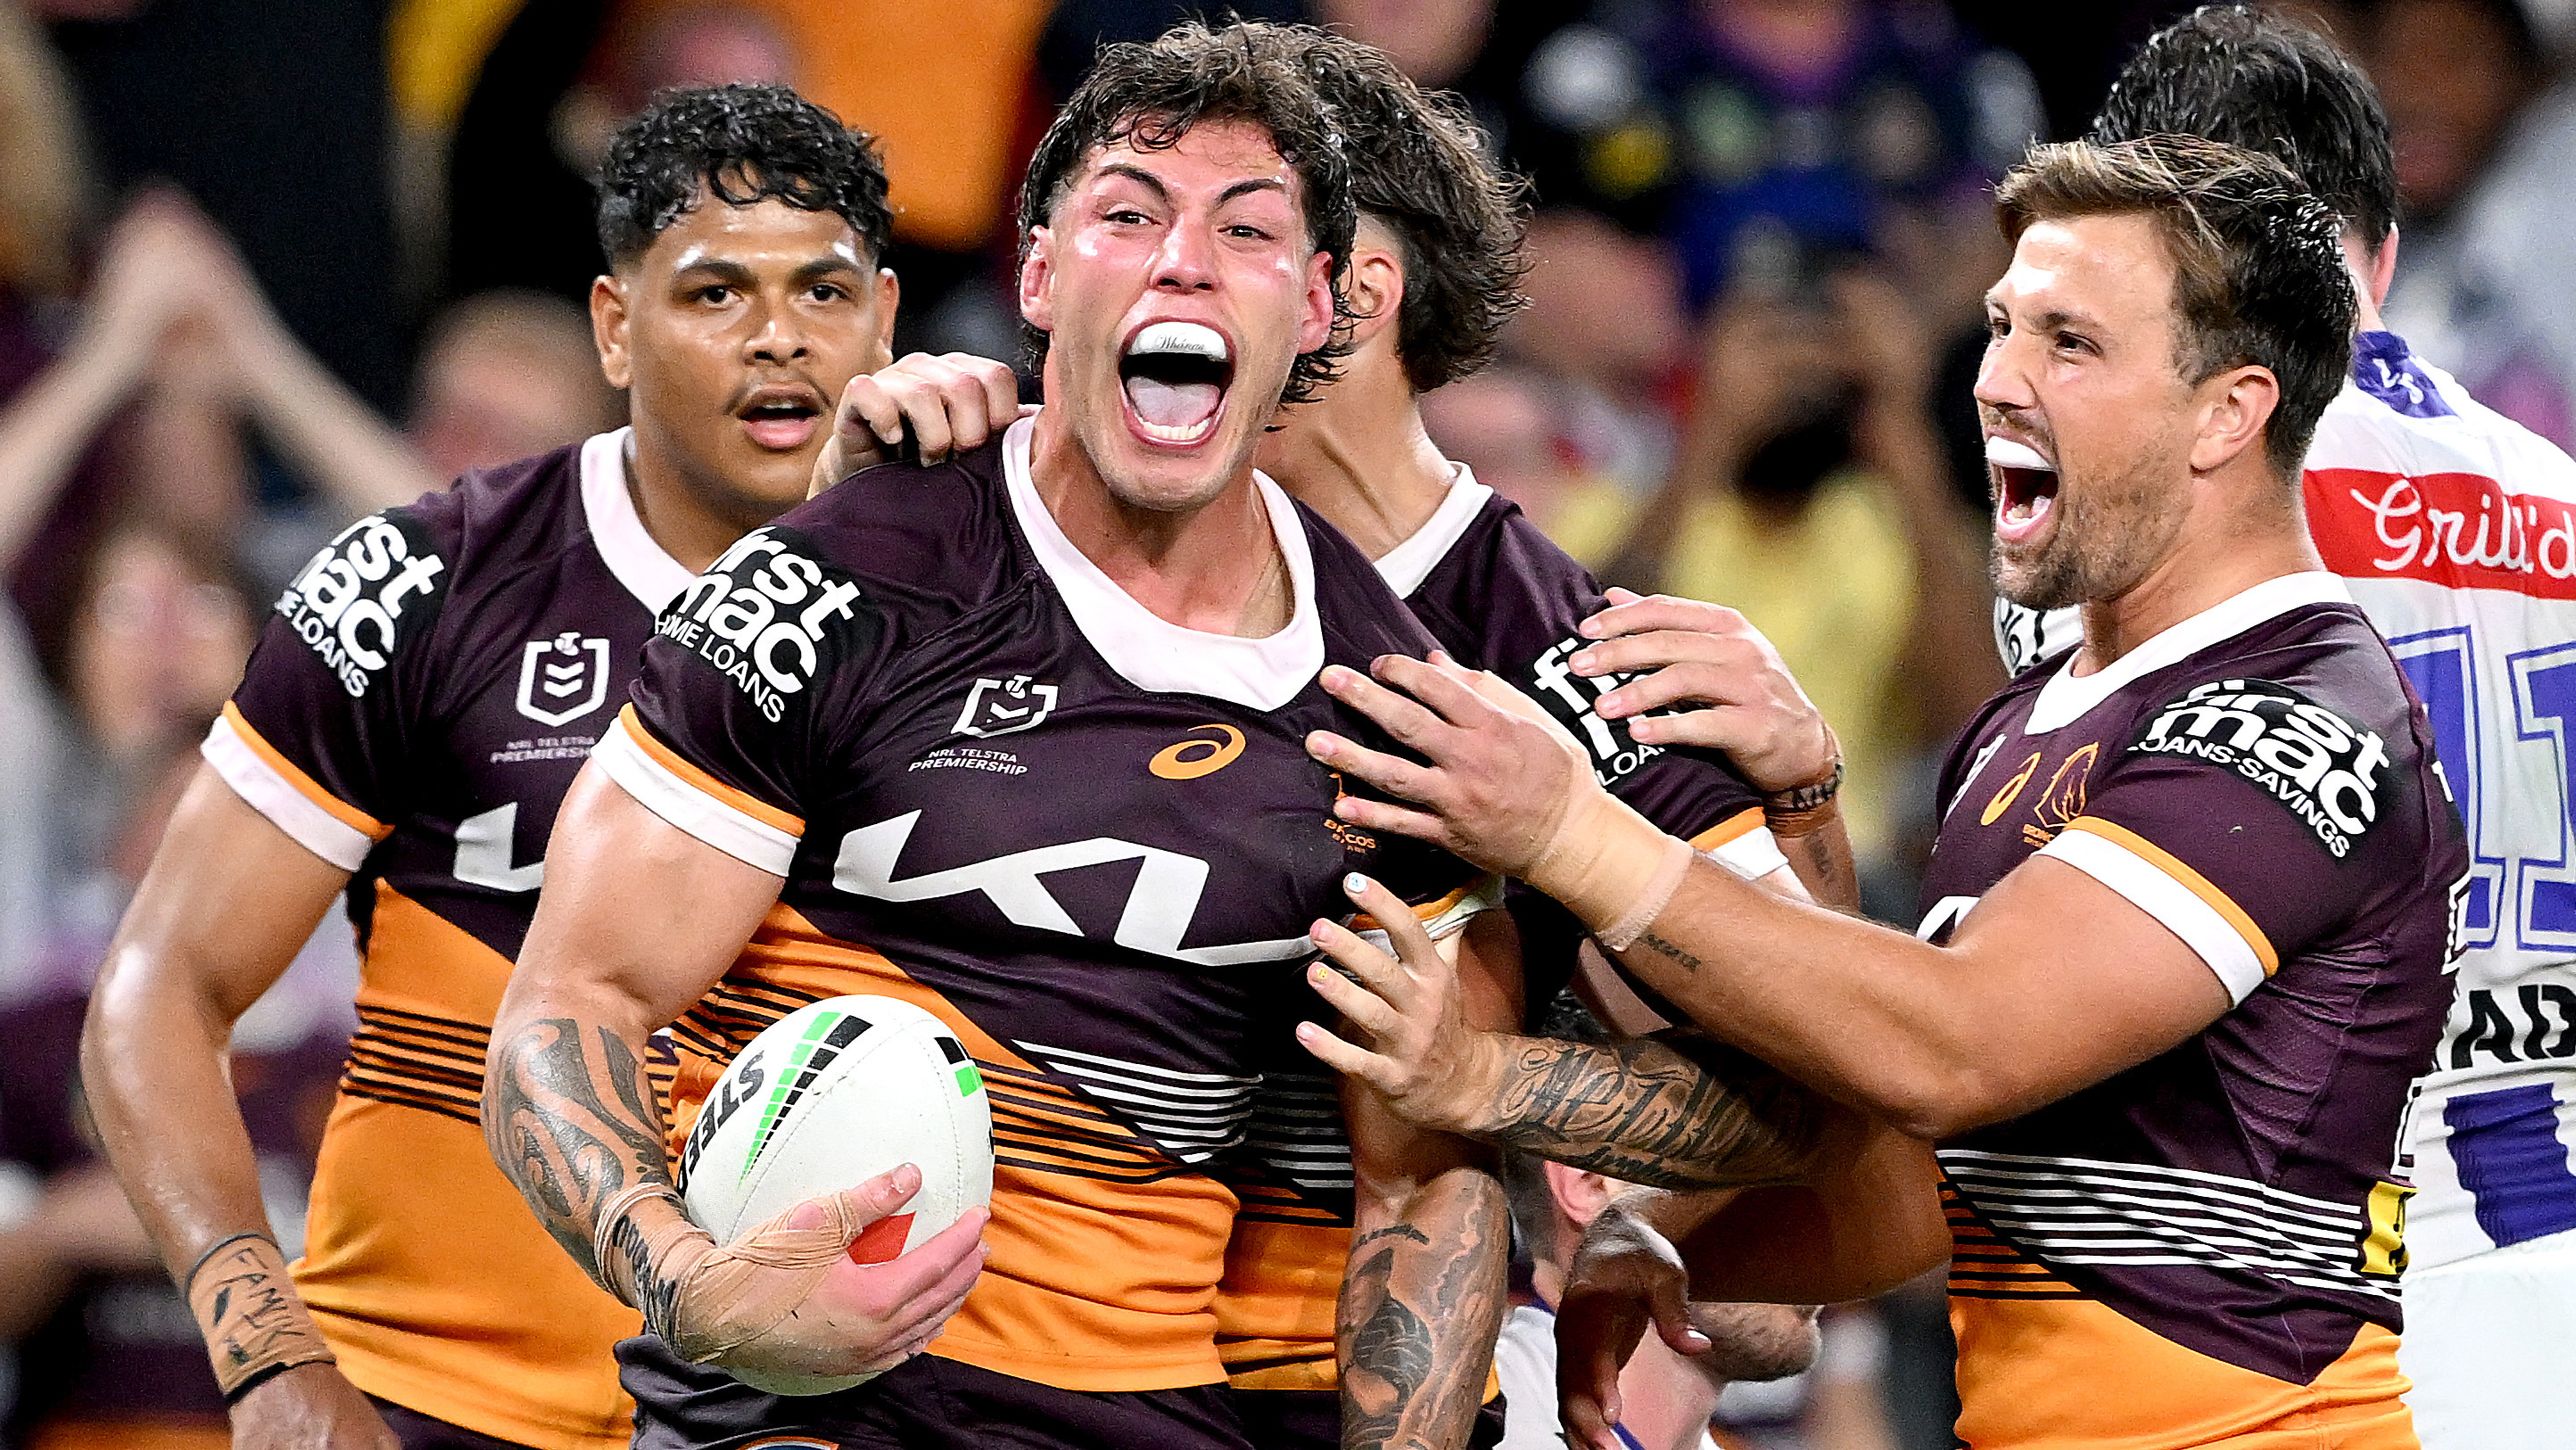 BRISBANE, AUSTRALIA - SEPTEMBER 08: Jordan Riki of the Broncos celebrates after scoring a try during the NRL Qualifying Final match between the Brisbane Broncos and Melbourne Storm at Suncorp Stadium on September 08, 2023 in Brisbane, Australia. (Photo by Bradley Kanaris/Getty Images)